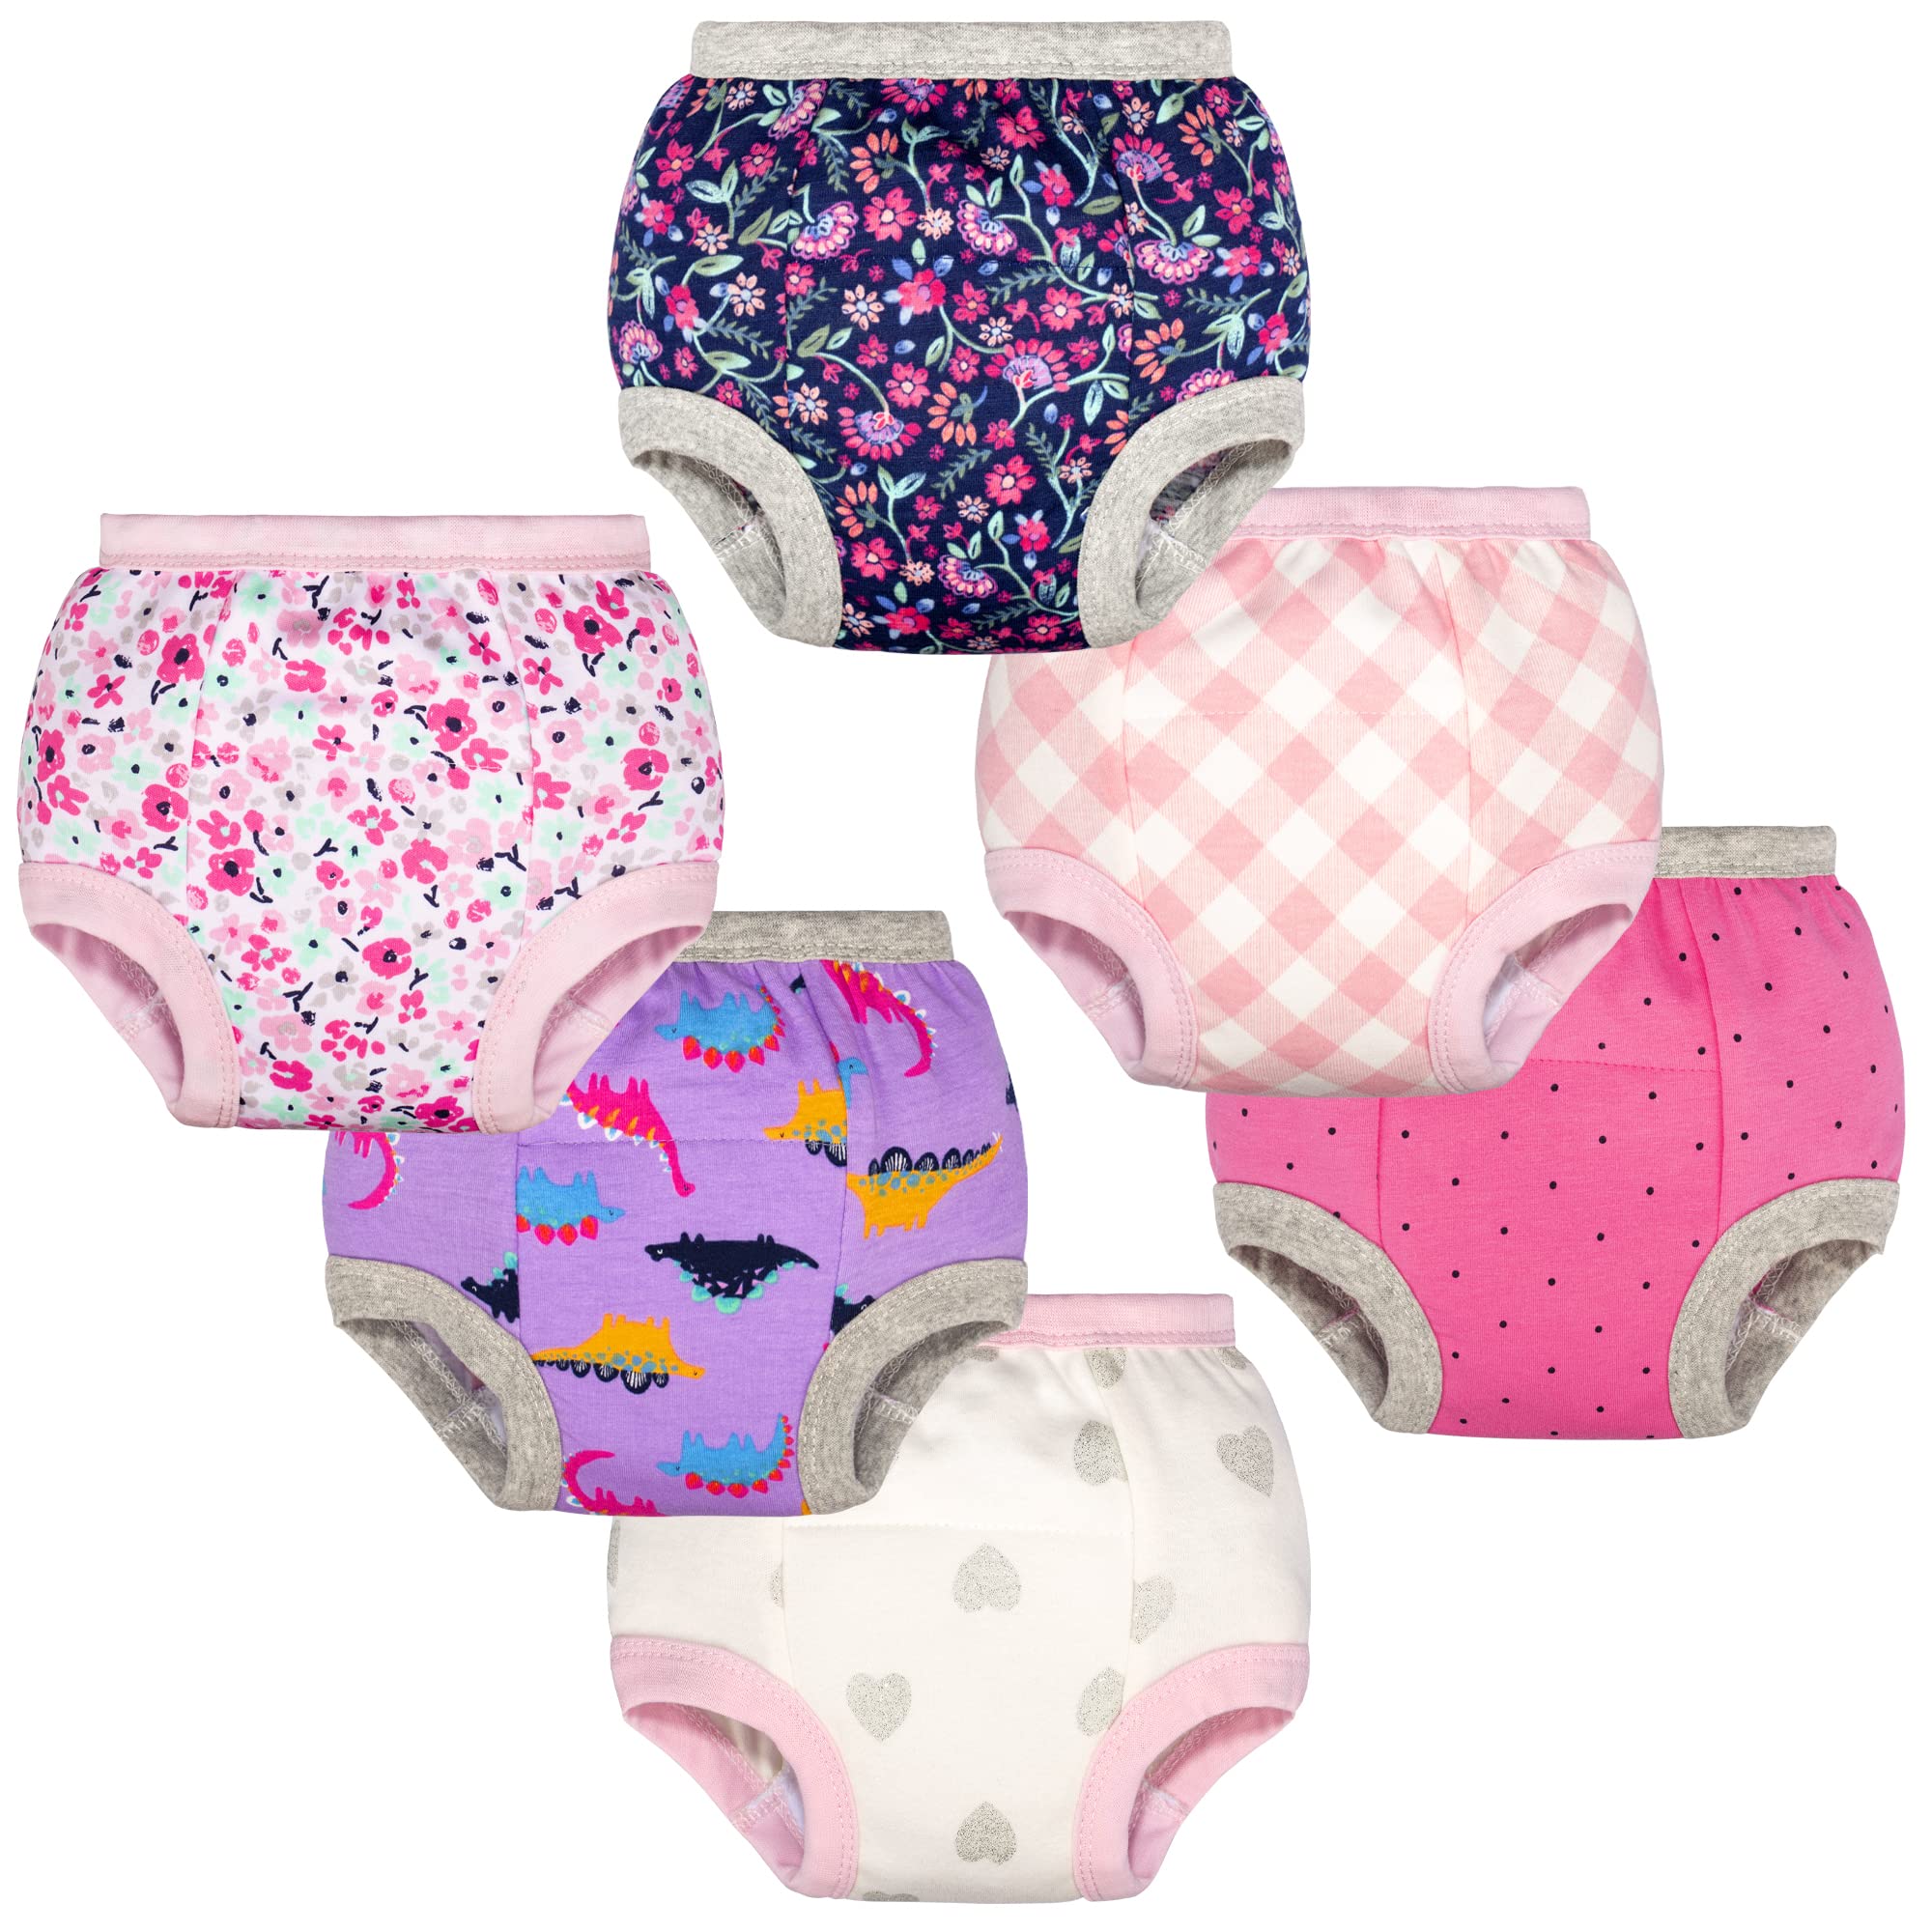  8 Packs Potty Training Pants Cotton Absorbent Training  Underwear For Toddler Baby Gir 5T